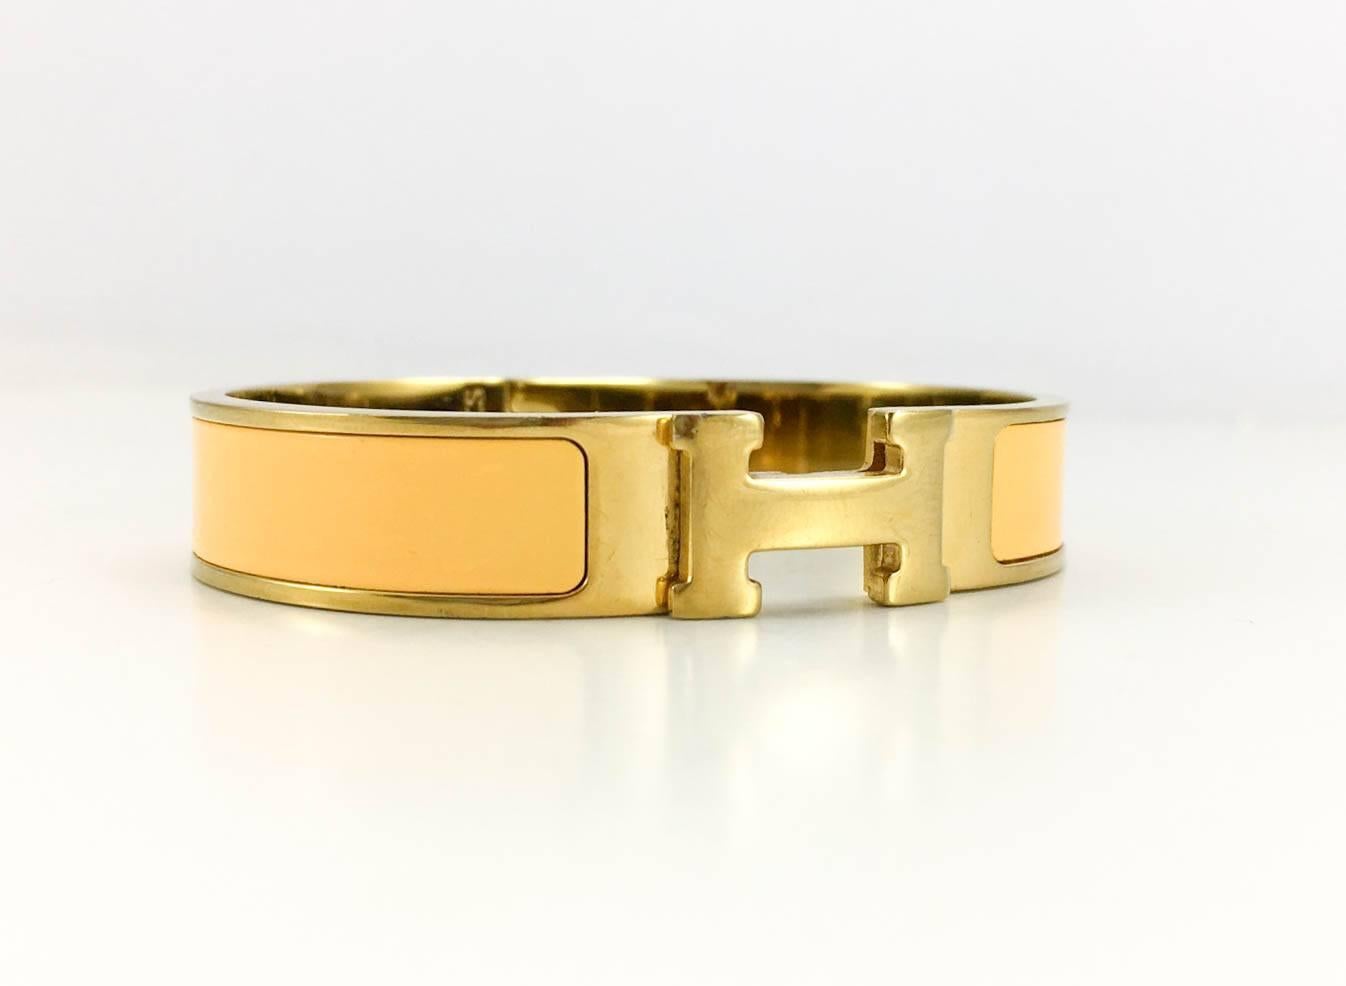 Hemes Clic Clac 'H' Yellow Bracelet - 2000s In Excellent Condition In London, Chelsea